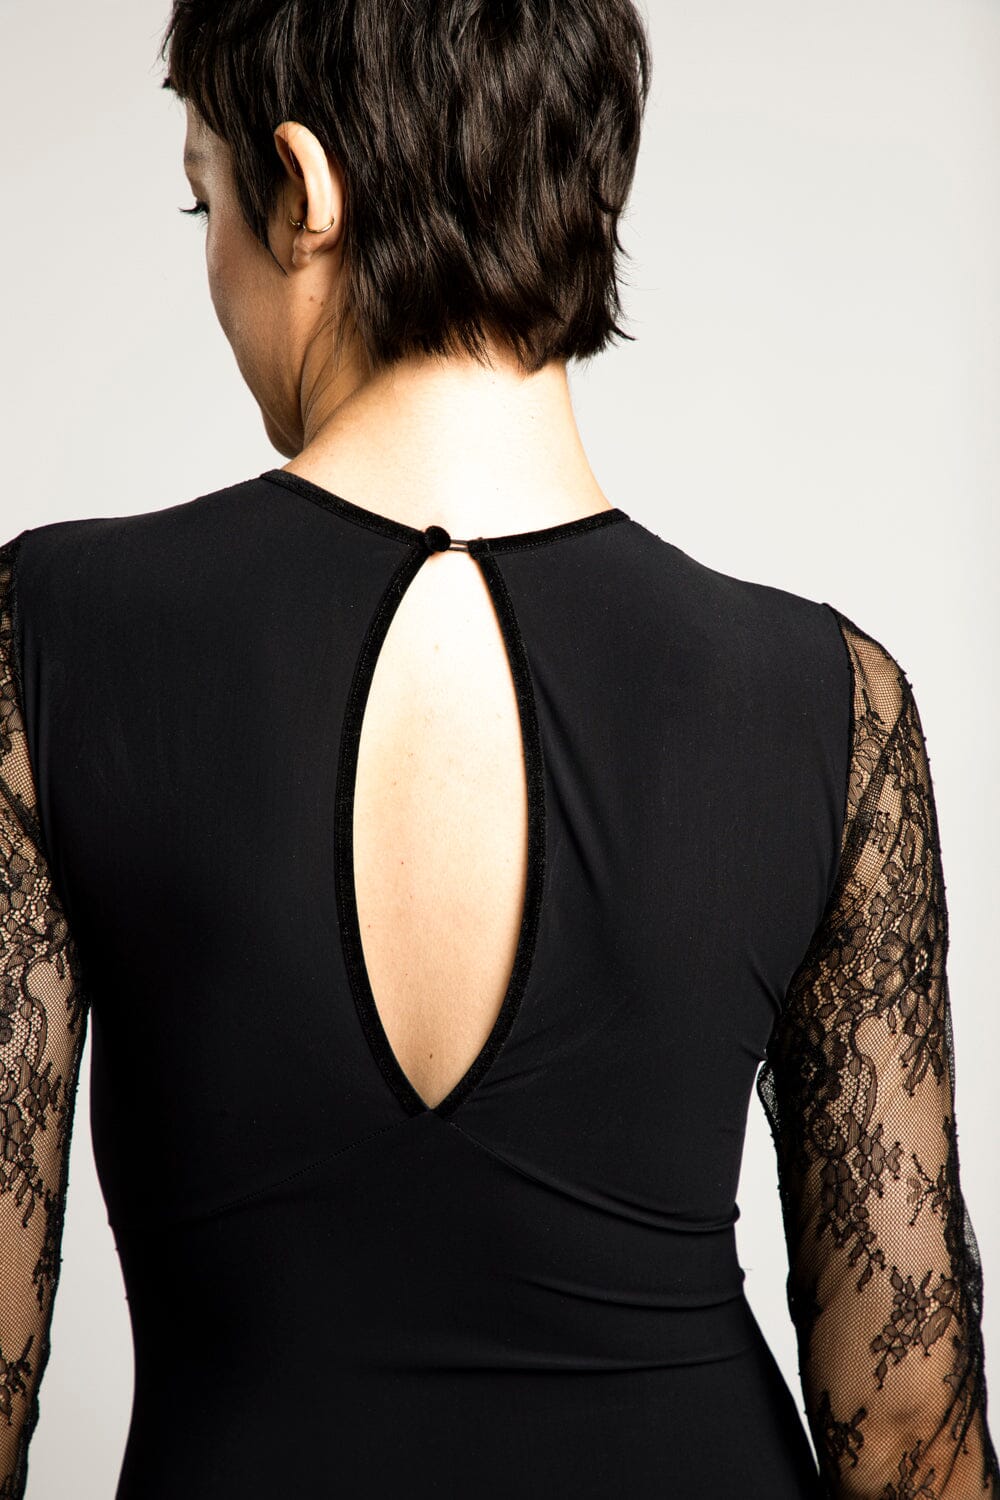  In Love With Summerly Bodysuit Black Product Amoralle